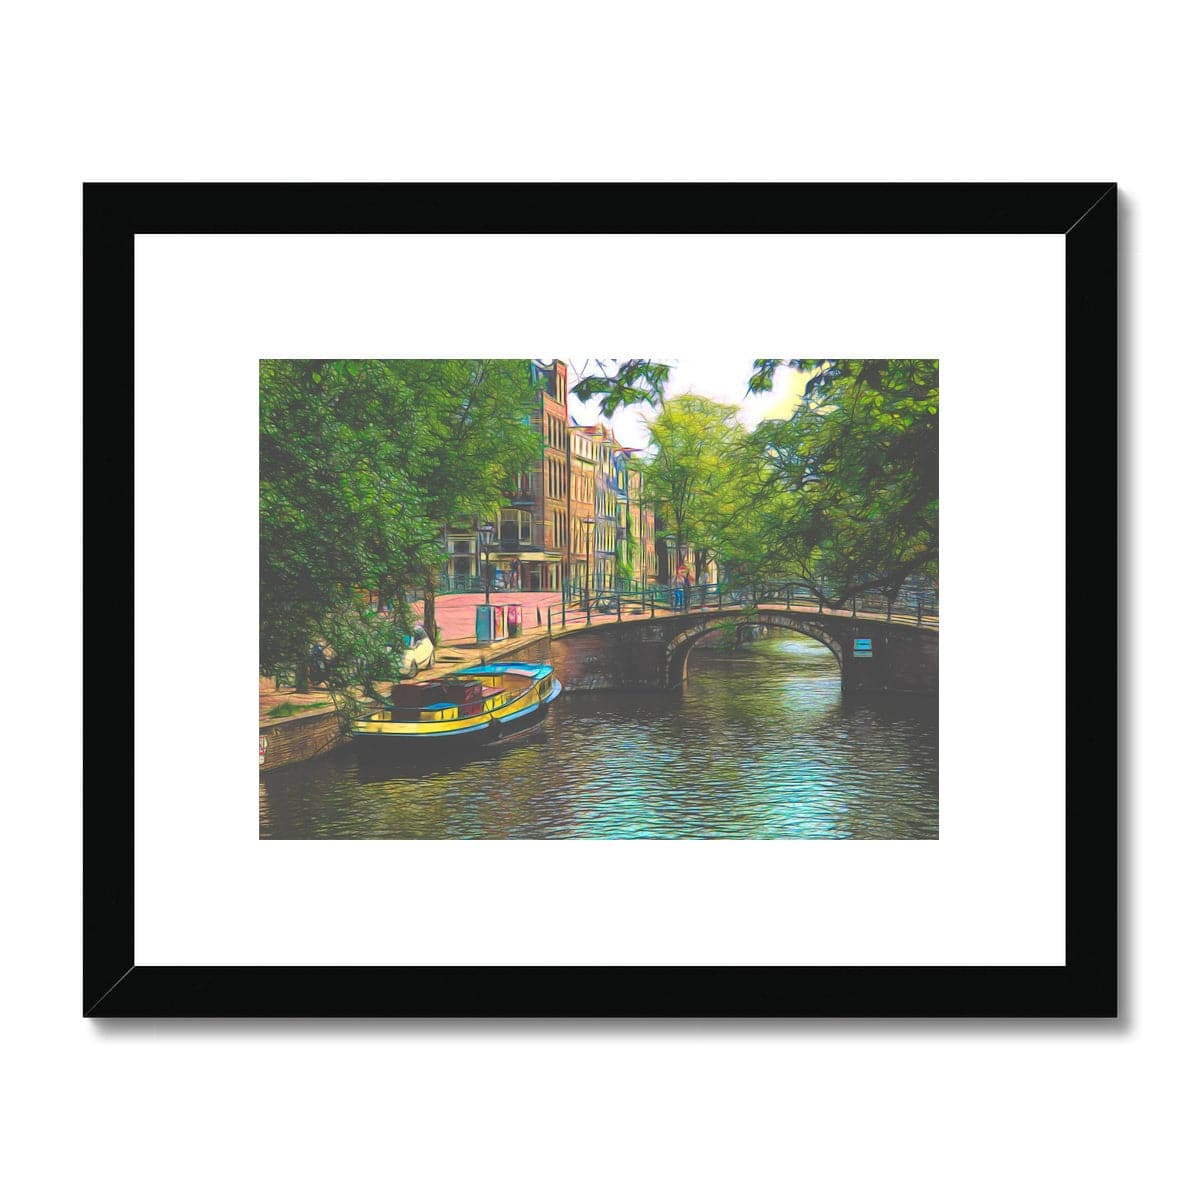 Boat and bridge in Amsterdam, Framed & Mounted Print, by Sensus Studio